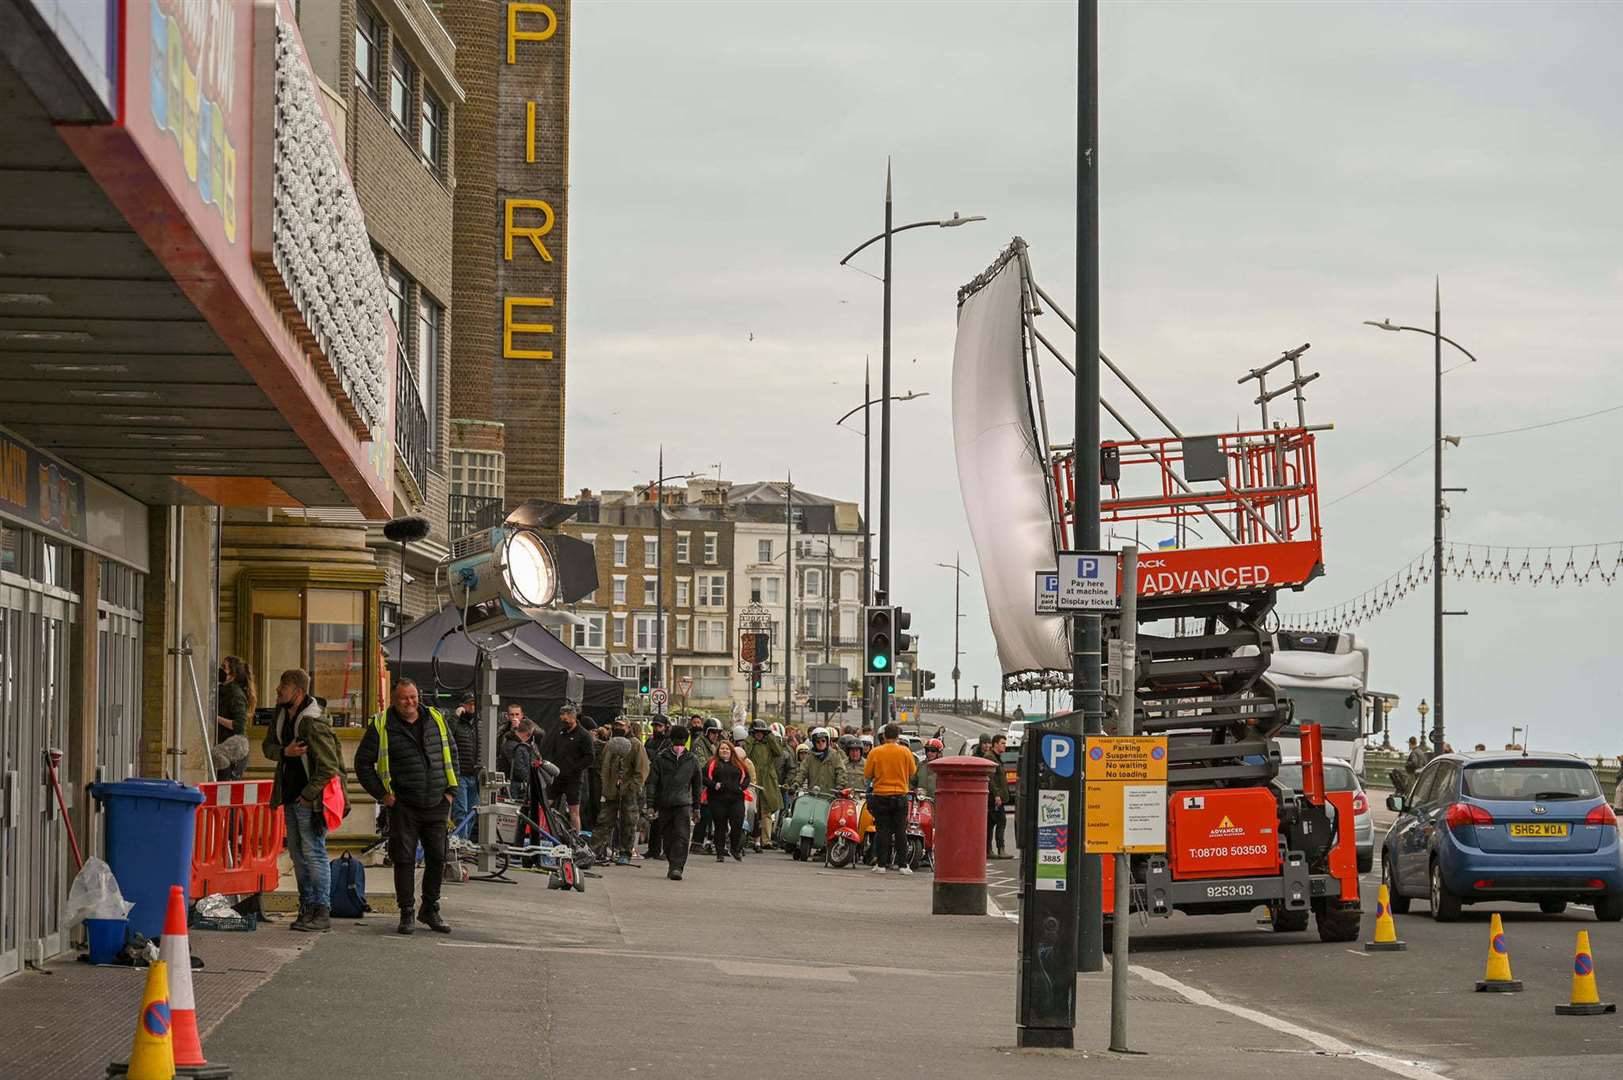 Much of the filming took place outside Margate's Dreamland, which has been made to look like a retro cinema called the Empire. Picture: Steven Collis Allfields Photography